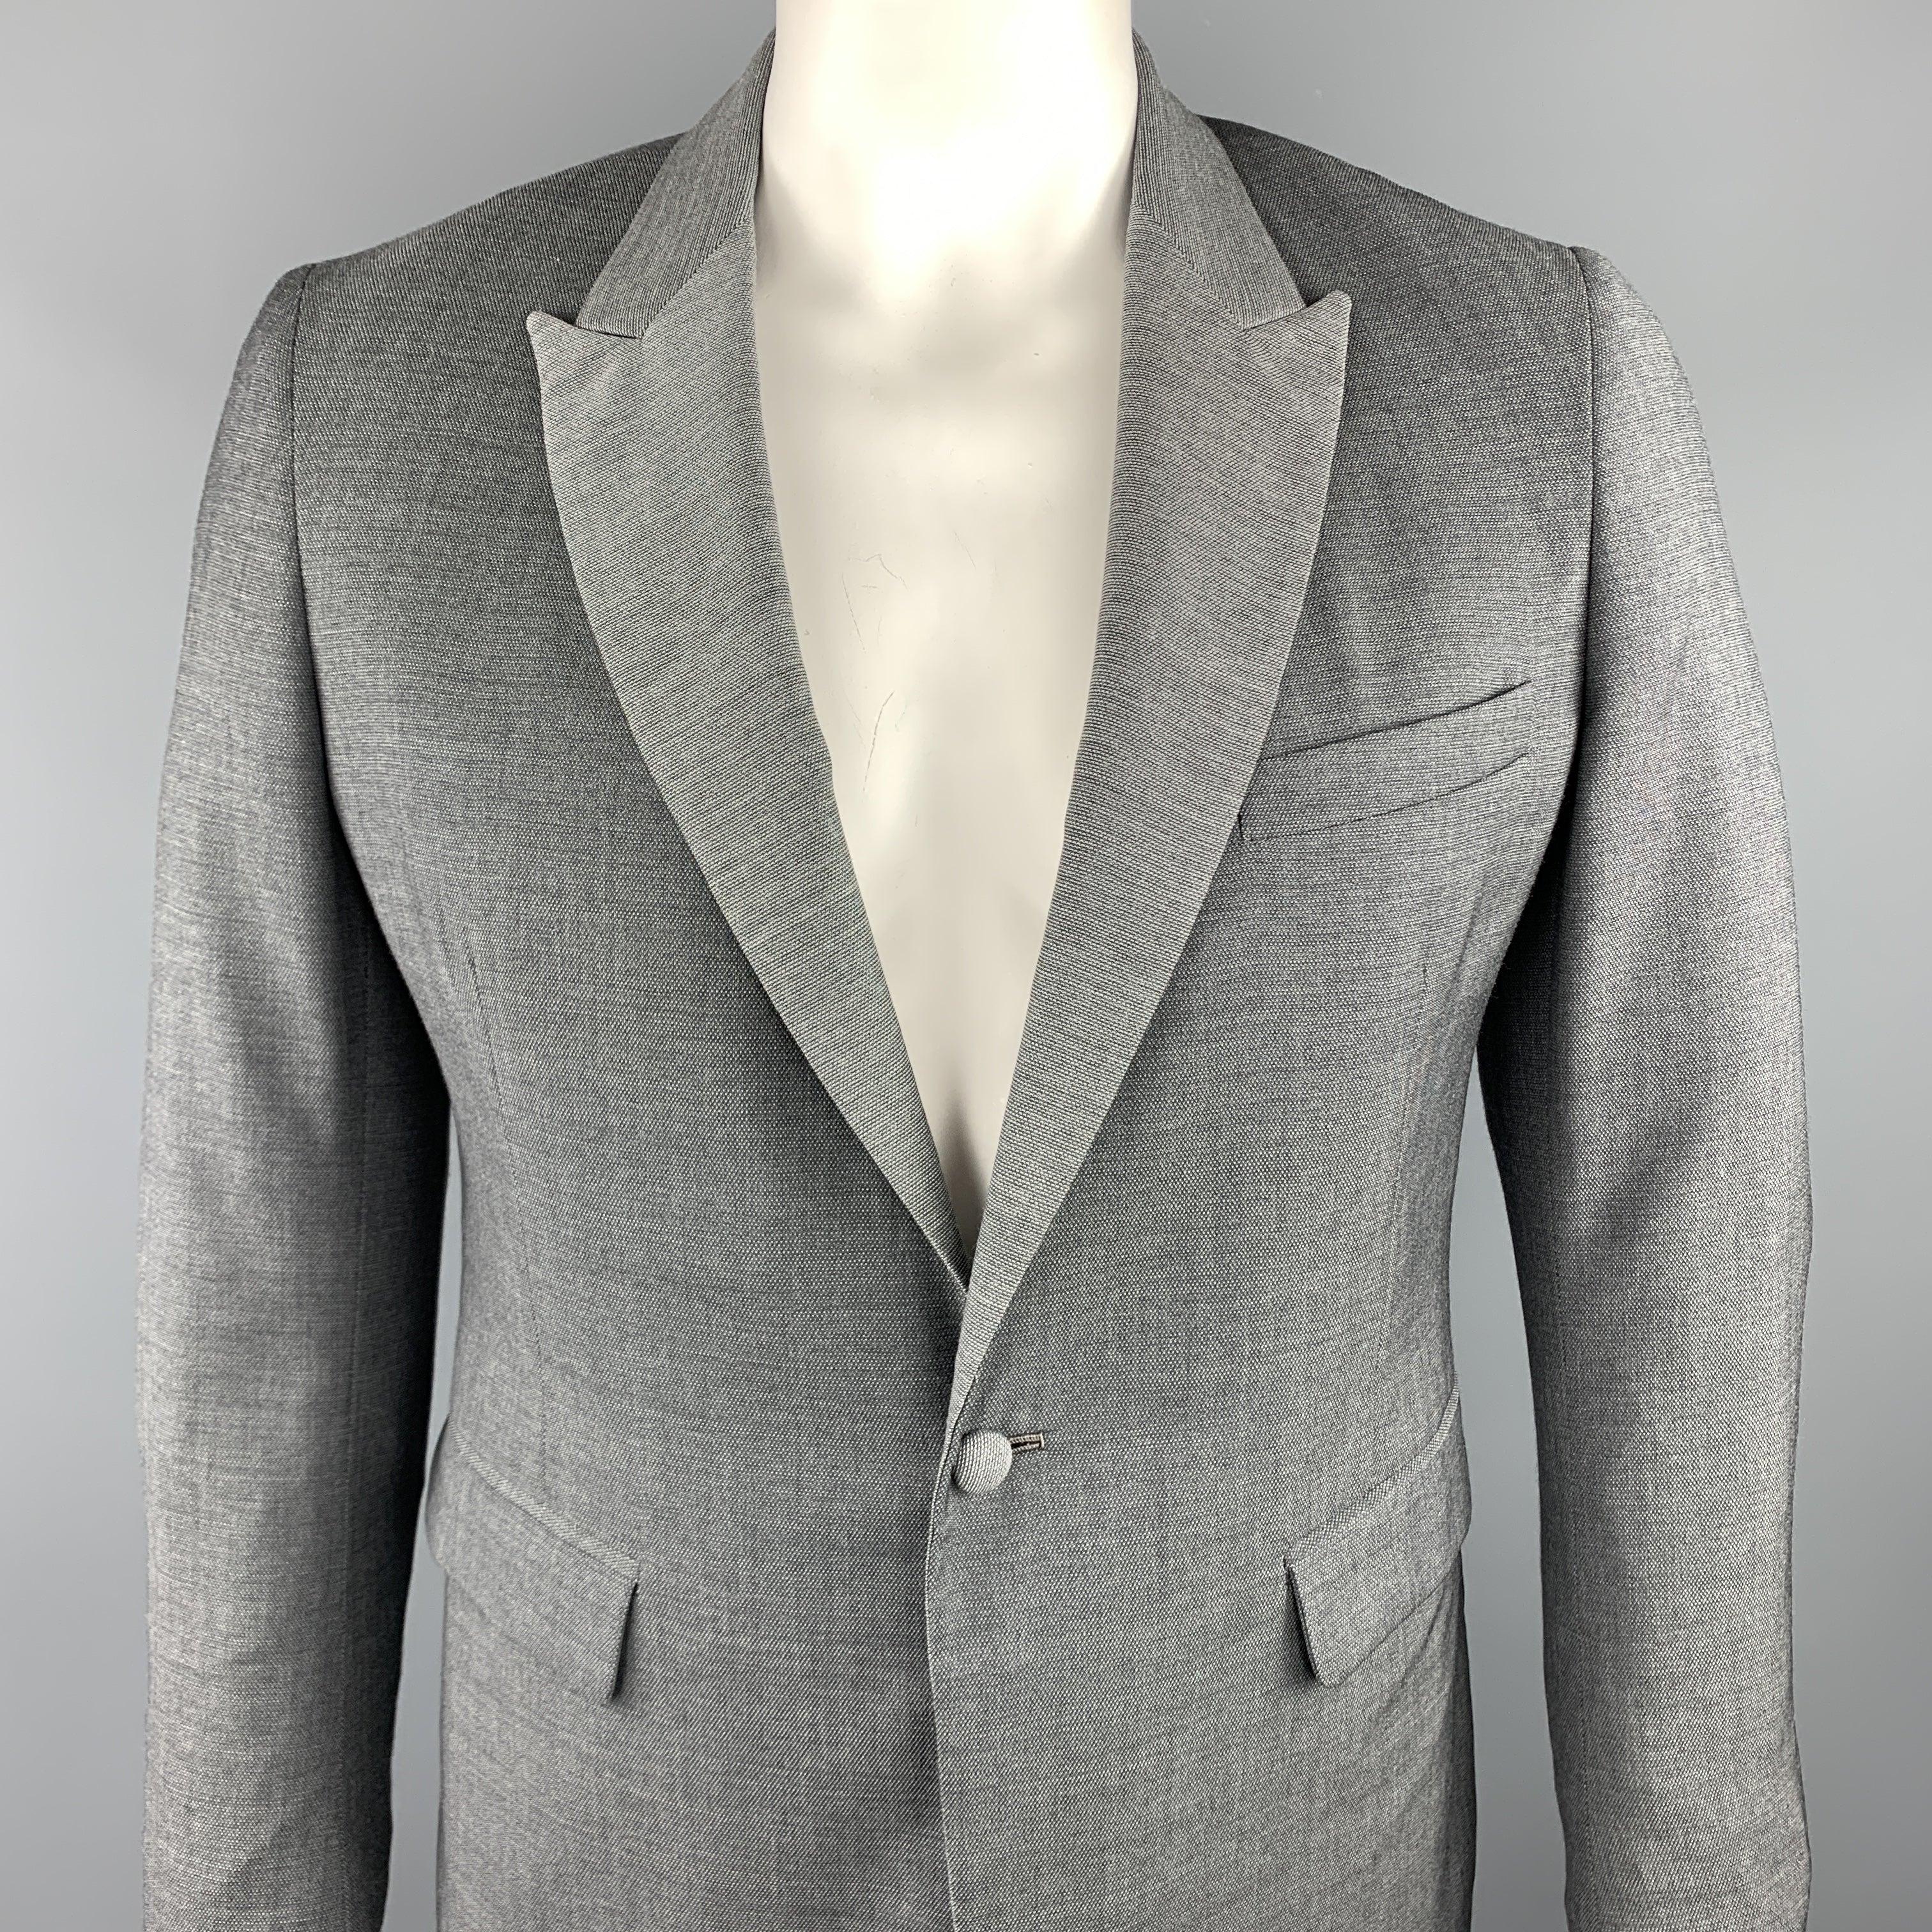 BAND OF OUTSIDERS sport coat comes in a gray nailhead wool featuring a peak lapel style, flap pockets, and a single button closure. Hand Tailored in USA.
Excellent
Pre-Owned Condition. 

Marked:   US 42 

Measurements: 
 
Shoulder: 17 inches 
Chest: